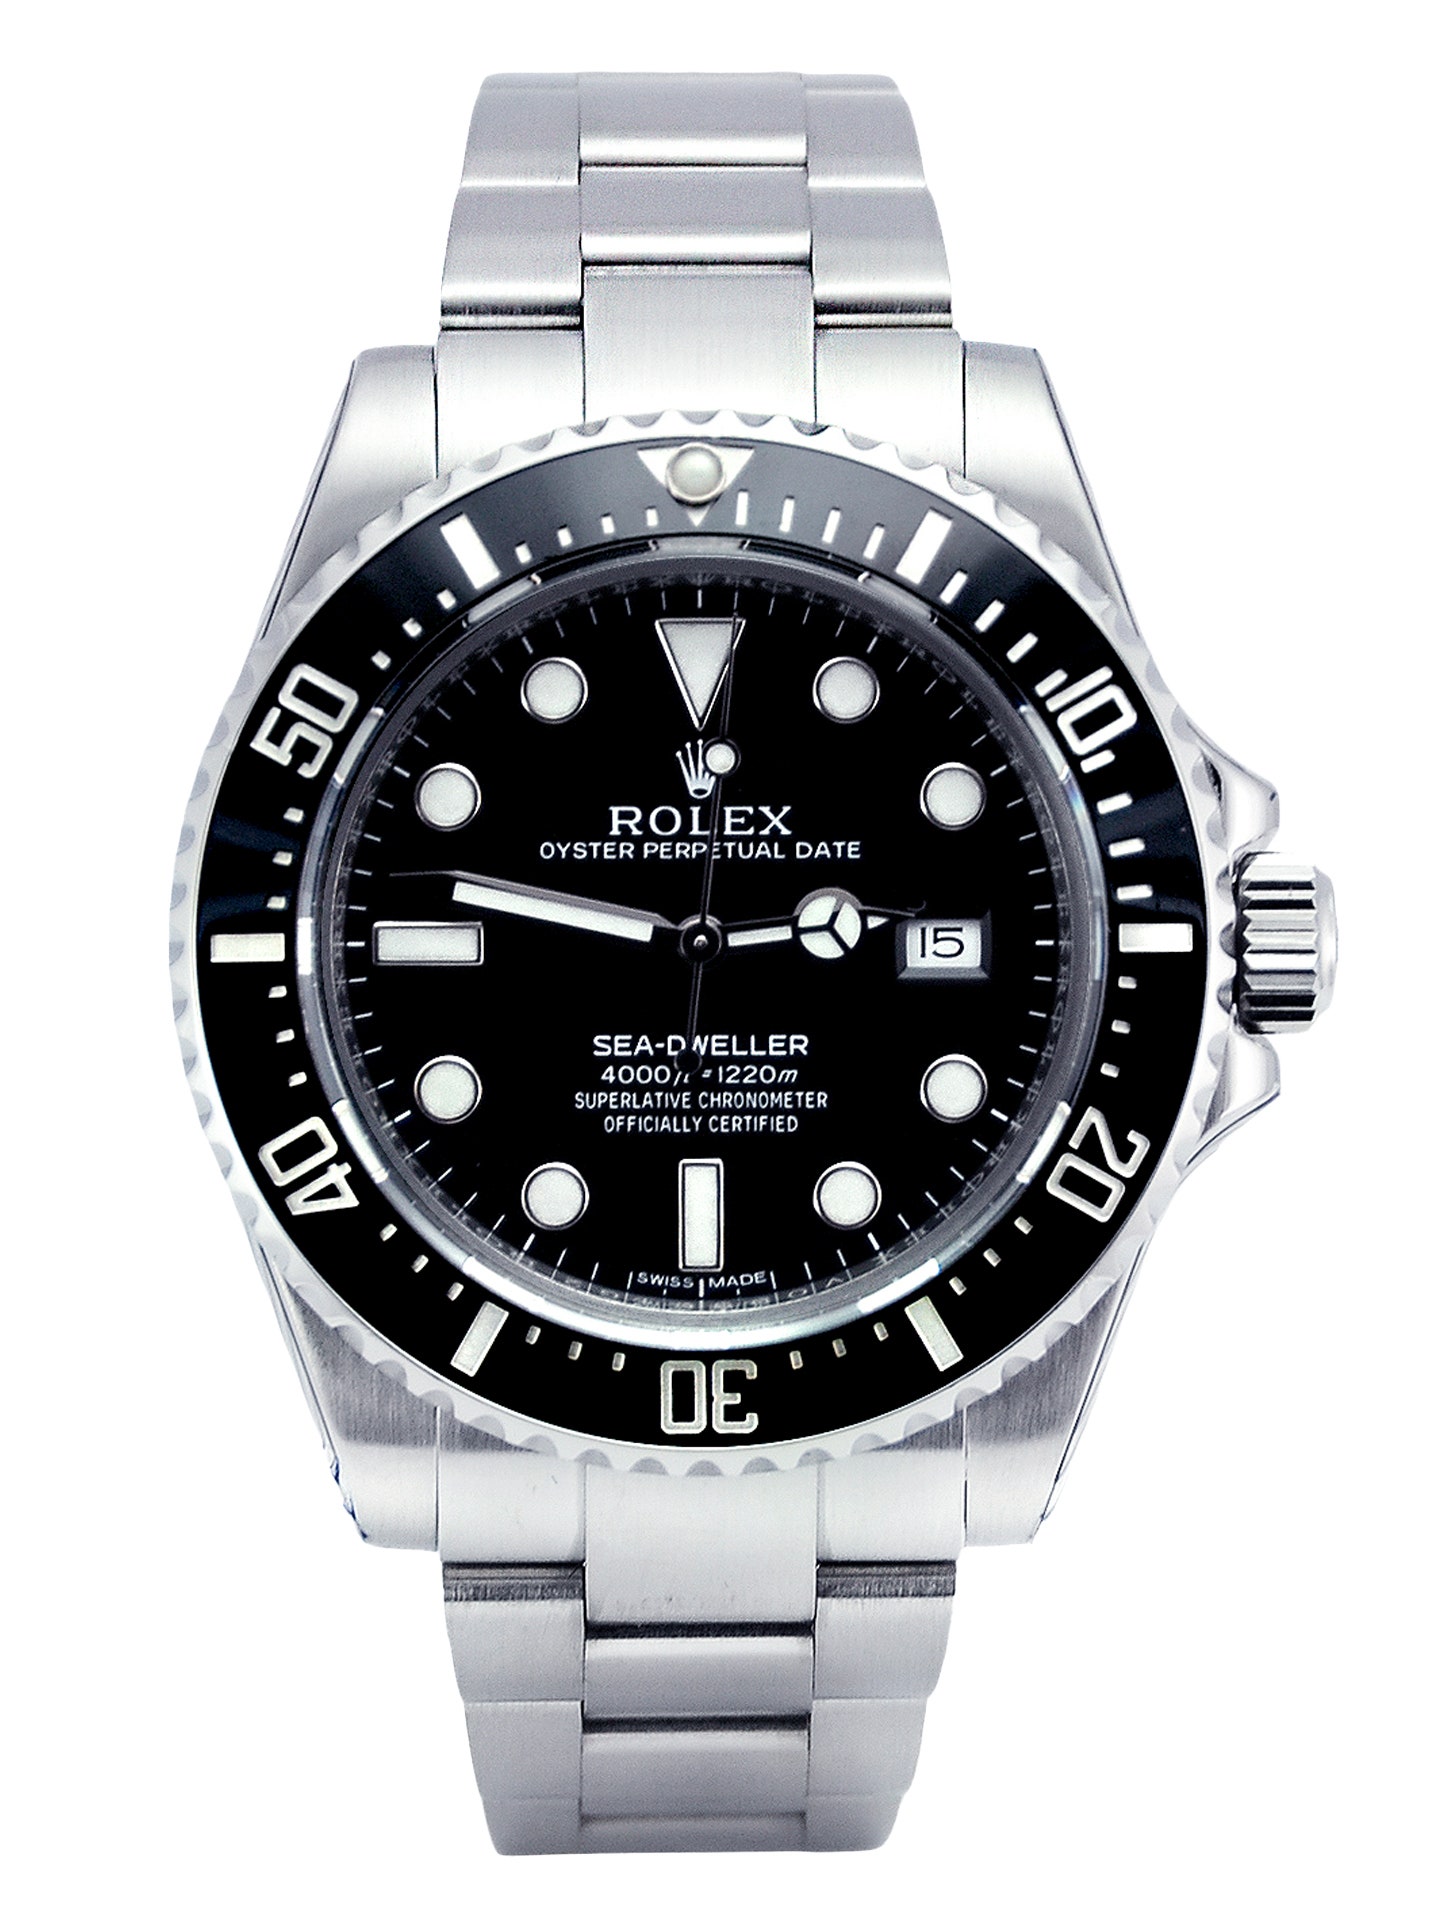 How to buy a Rolex according experts